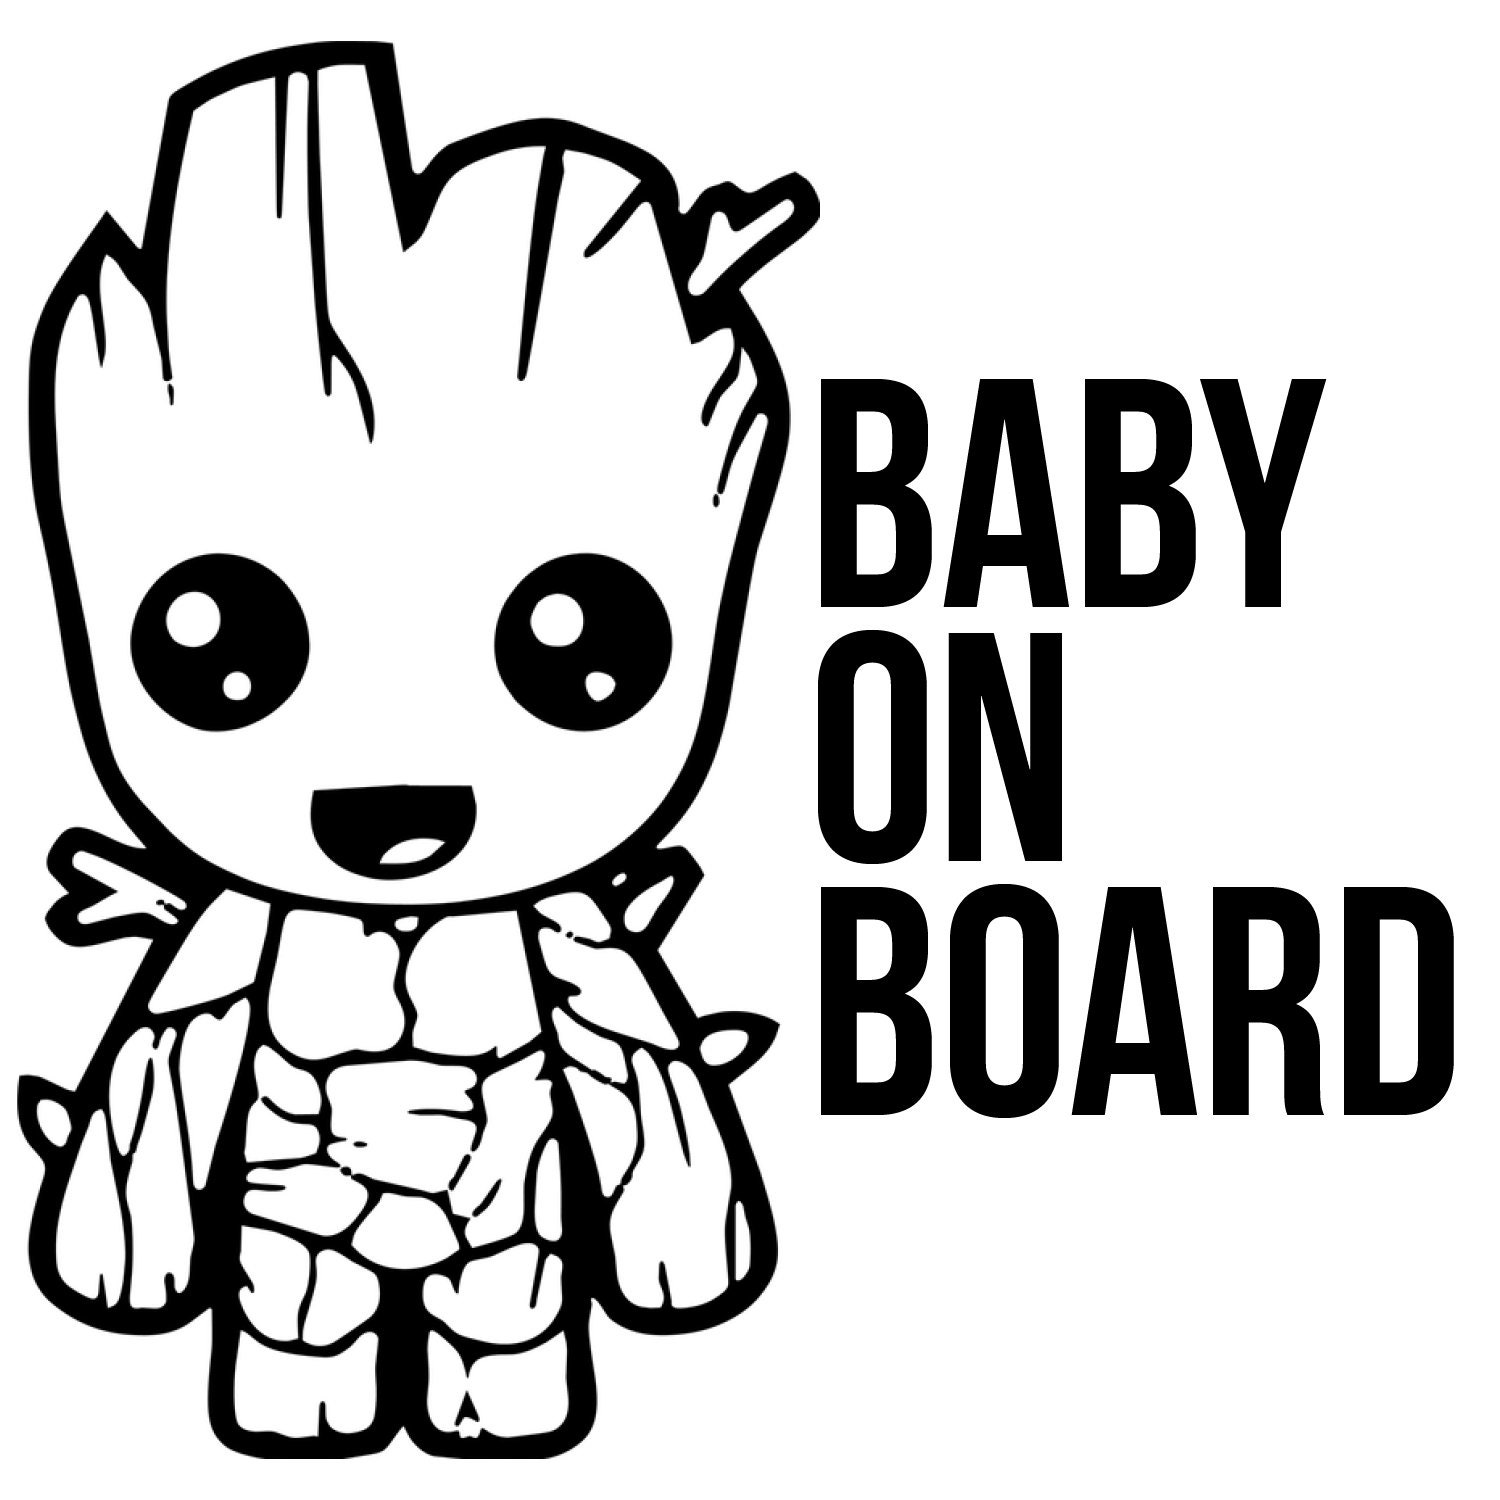 Download Svg Car Decal Cut File Baby Groot Baby On Board Etsy